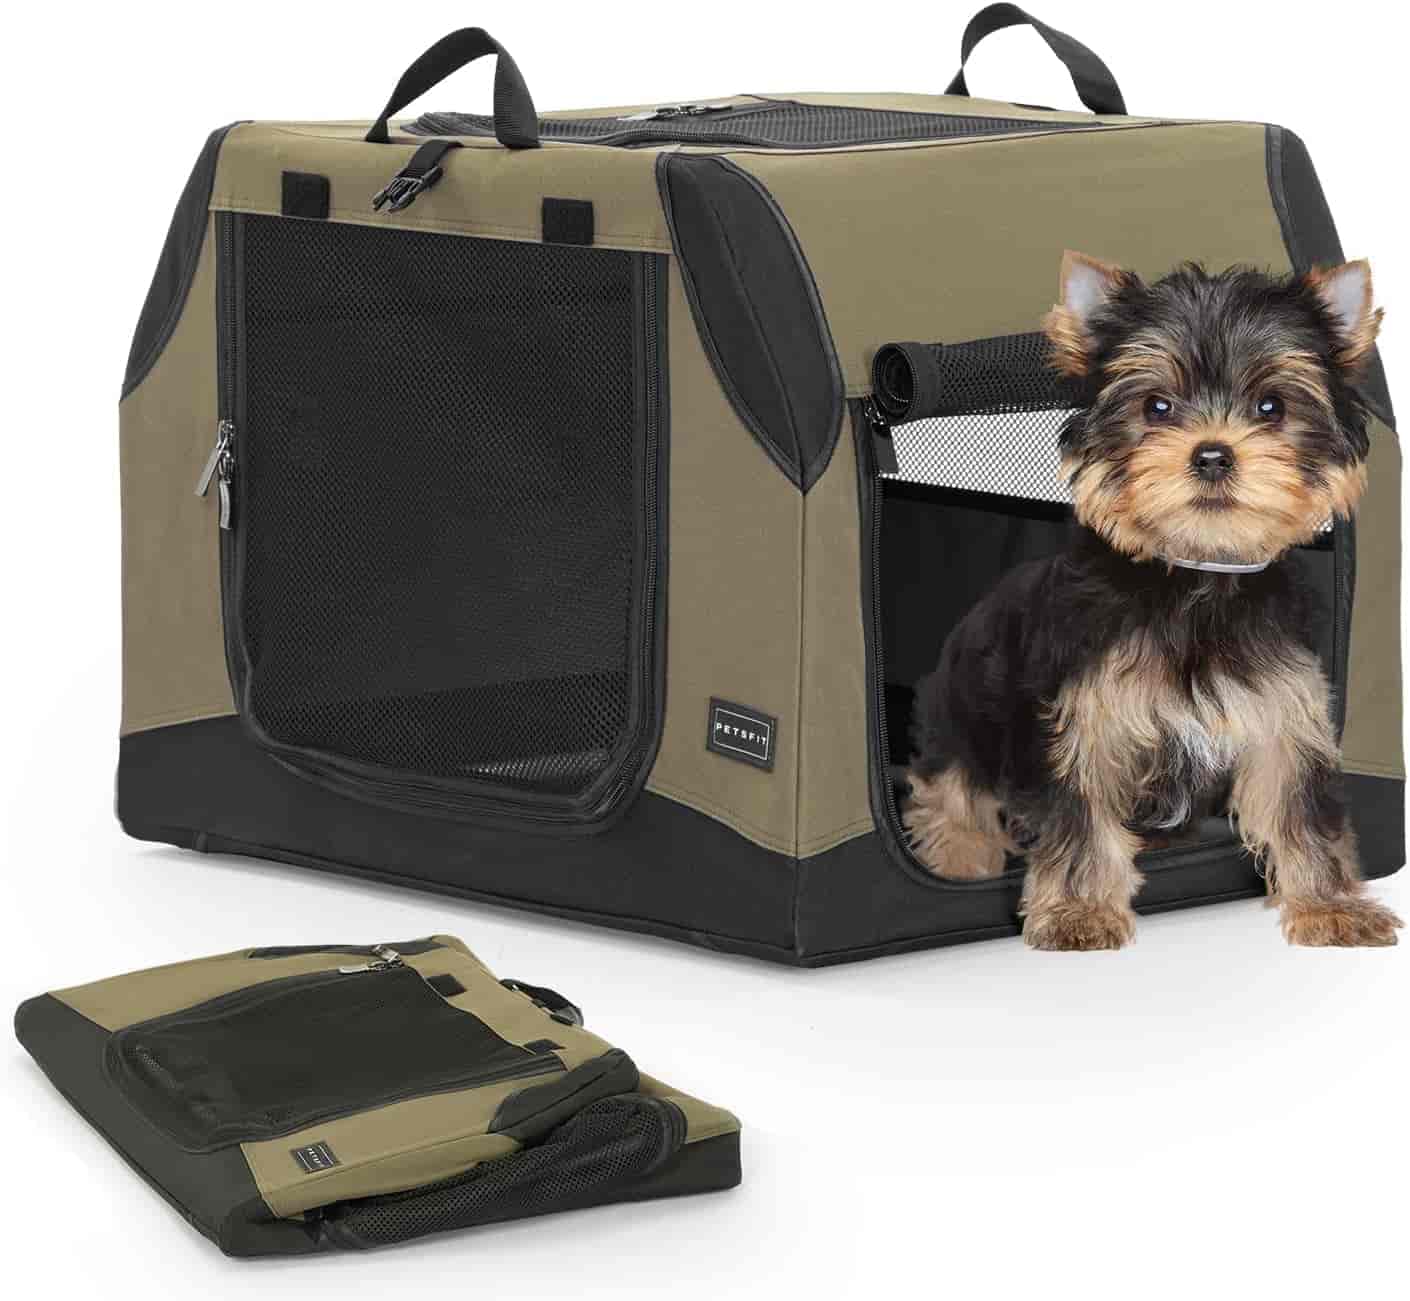 PETSFIT Soft-Sided Portable Travel Kennel for Pet